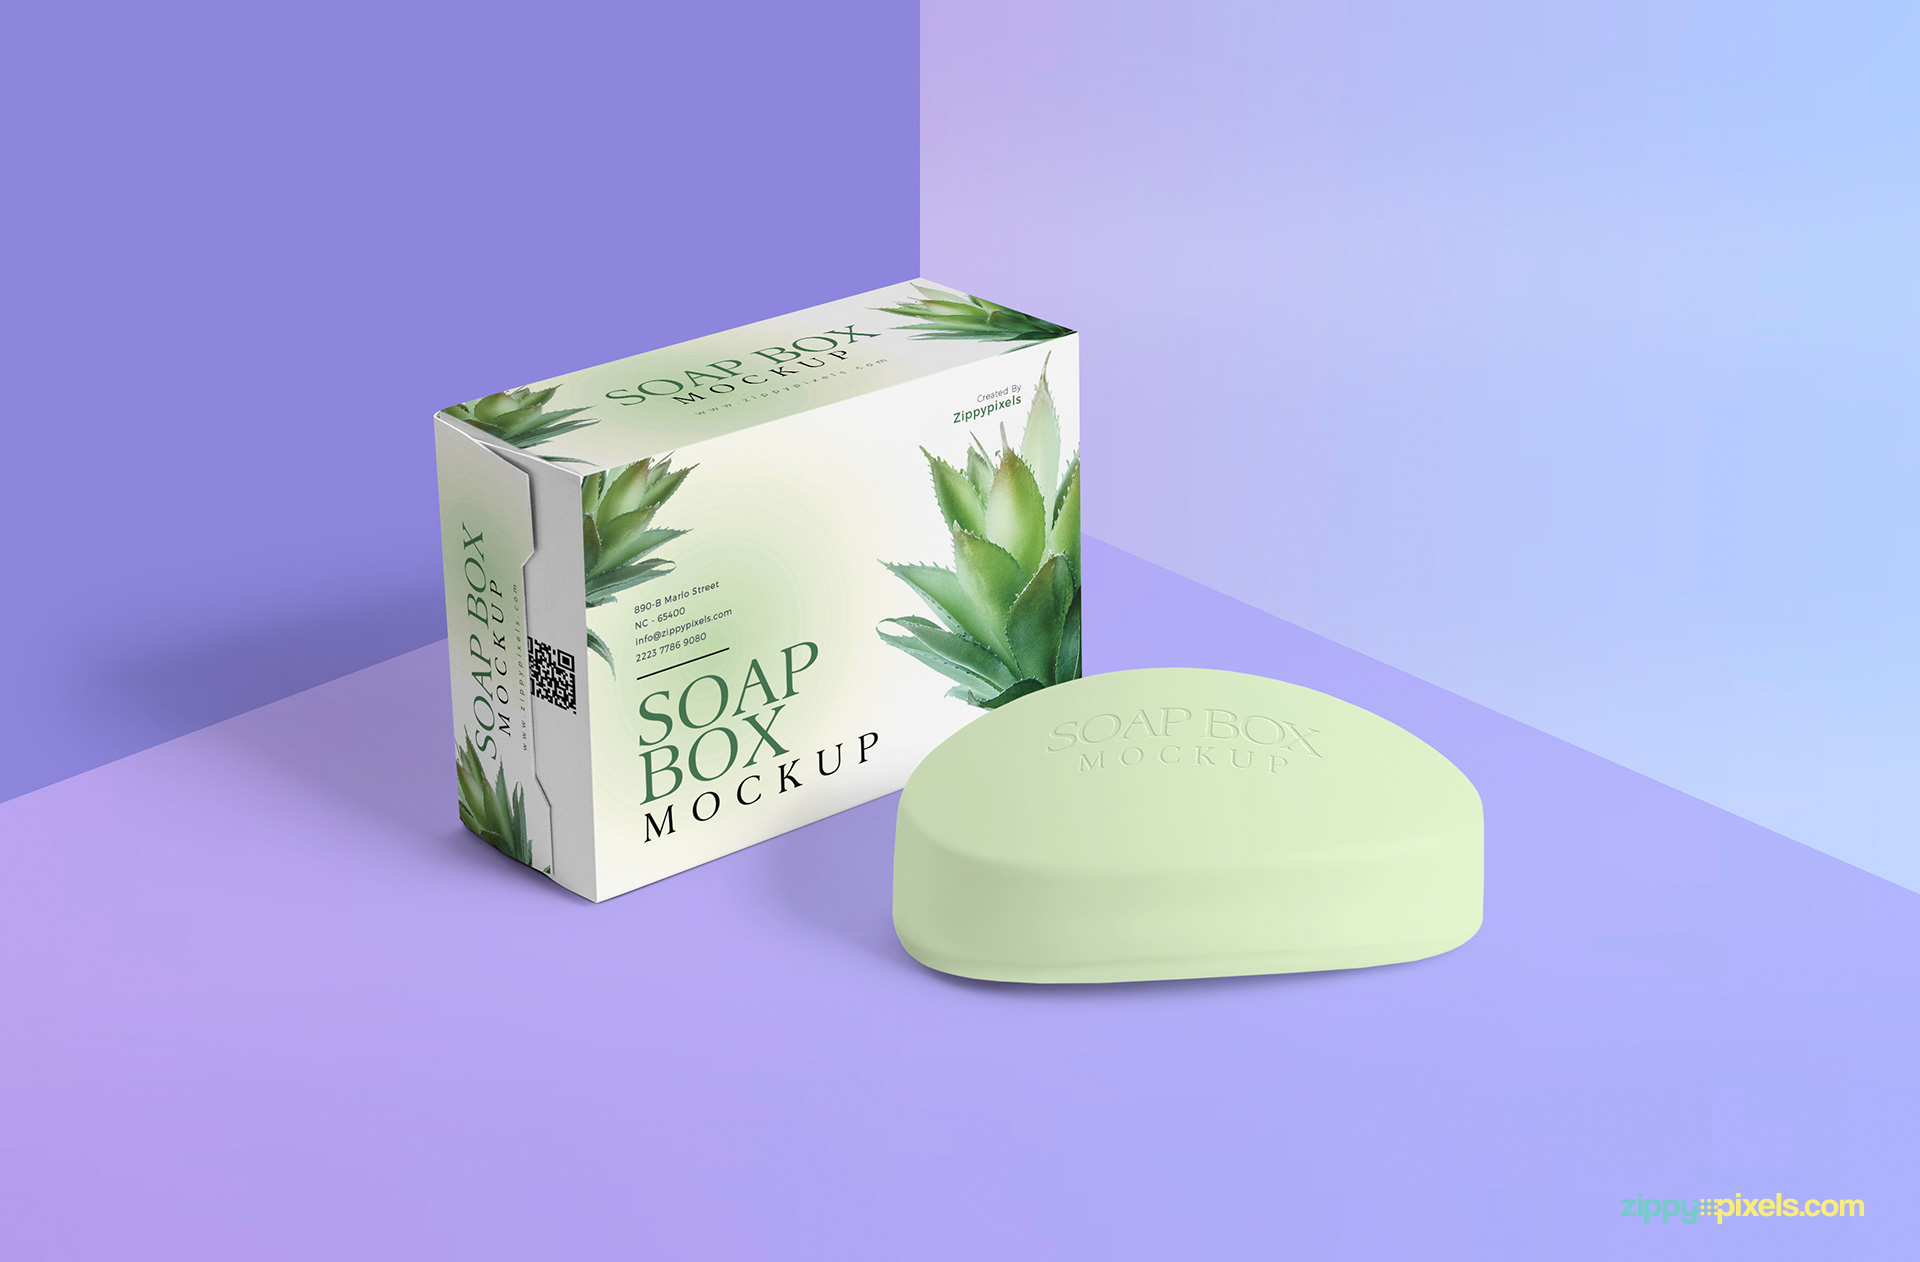 Full-view-packaging-box-and-soap-mockup-57f07a34